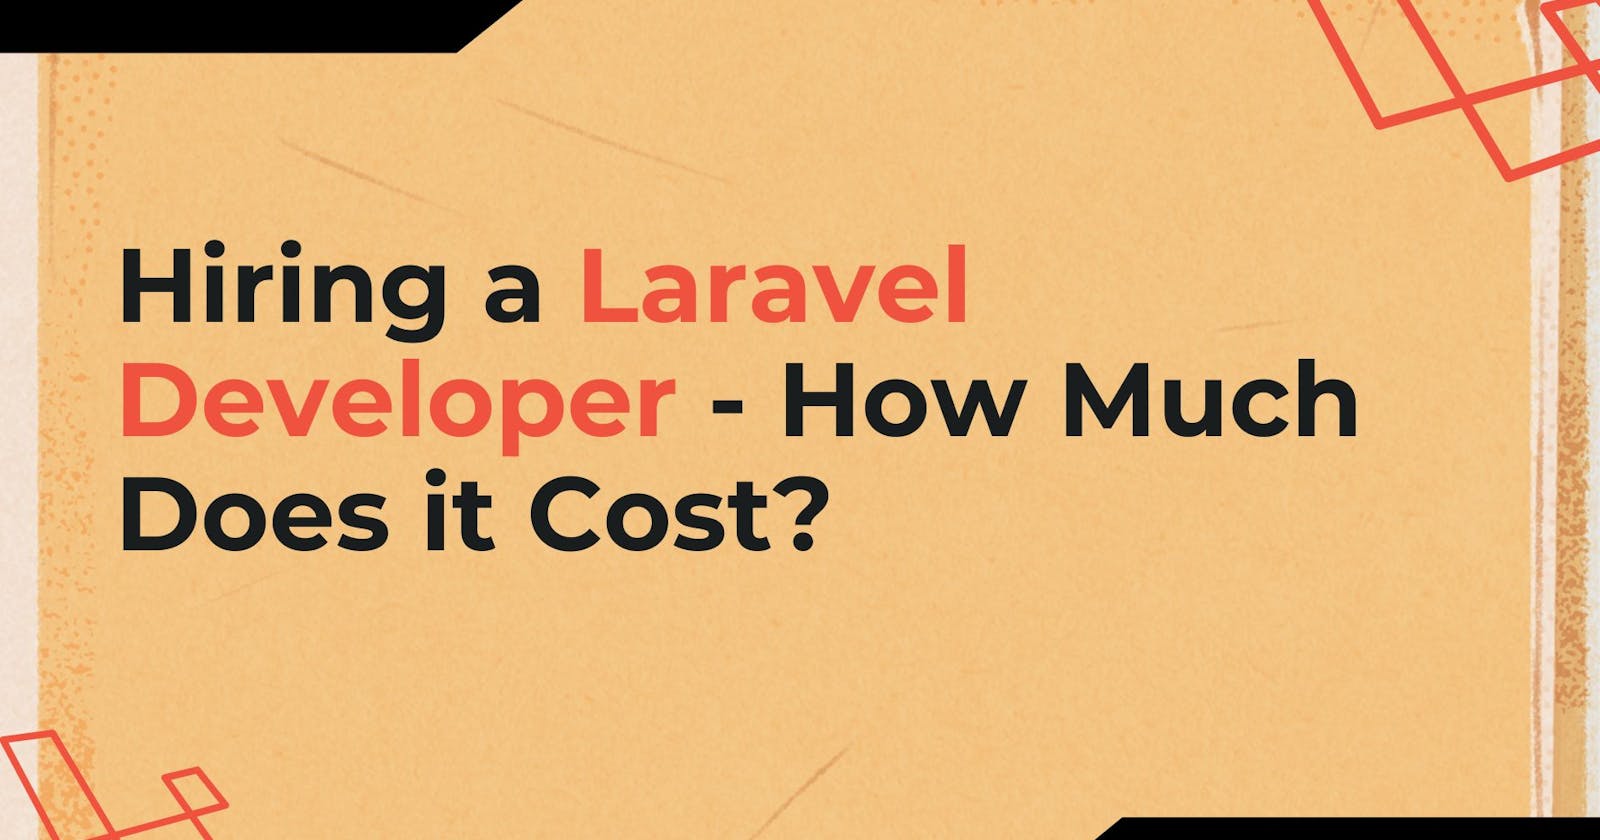 Hiring a Laravel Developer - How Much Does it Cost?